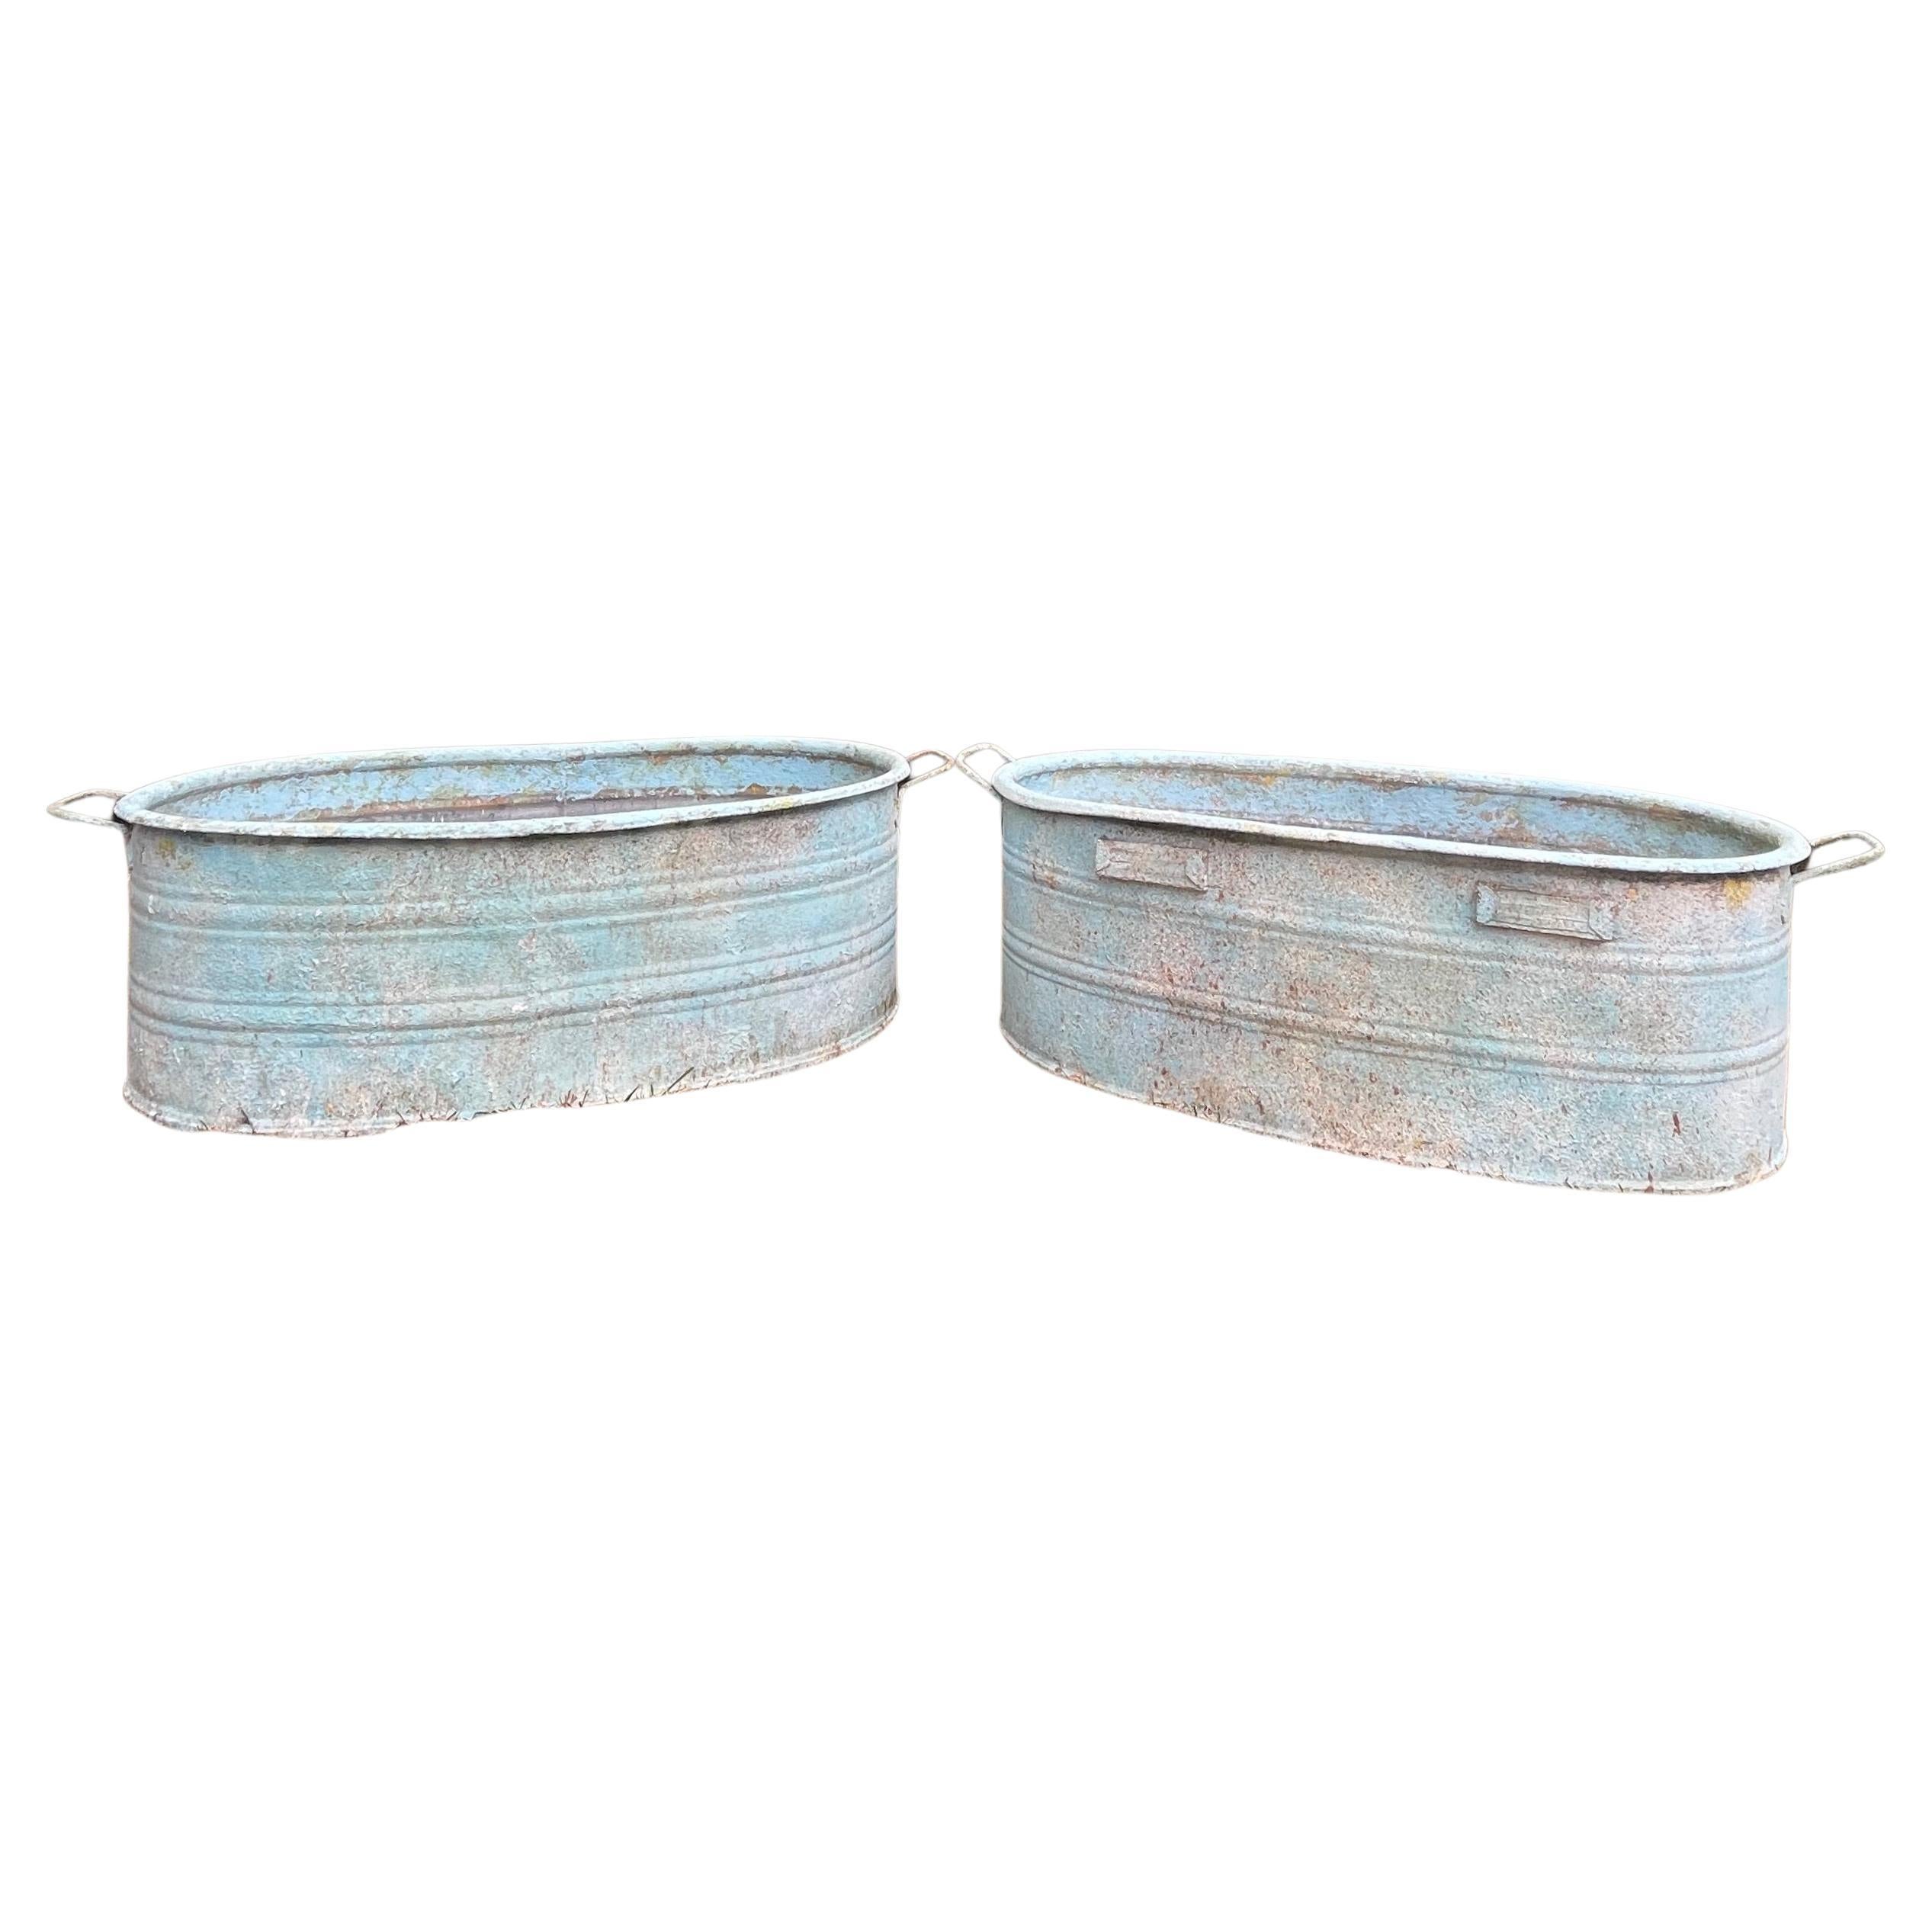 Near-Pair of Very Large German Oval Galvanized Planters #3 with Custom Surface For Sale